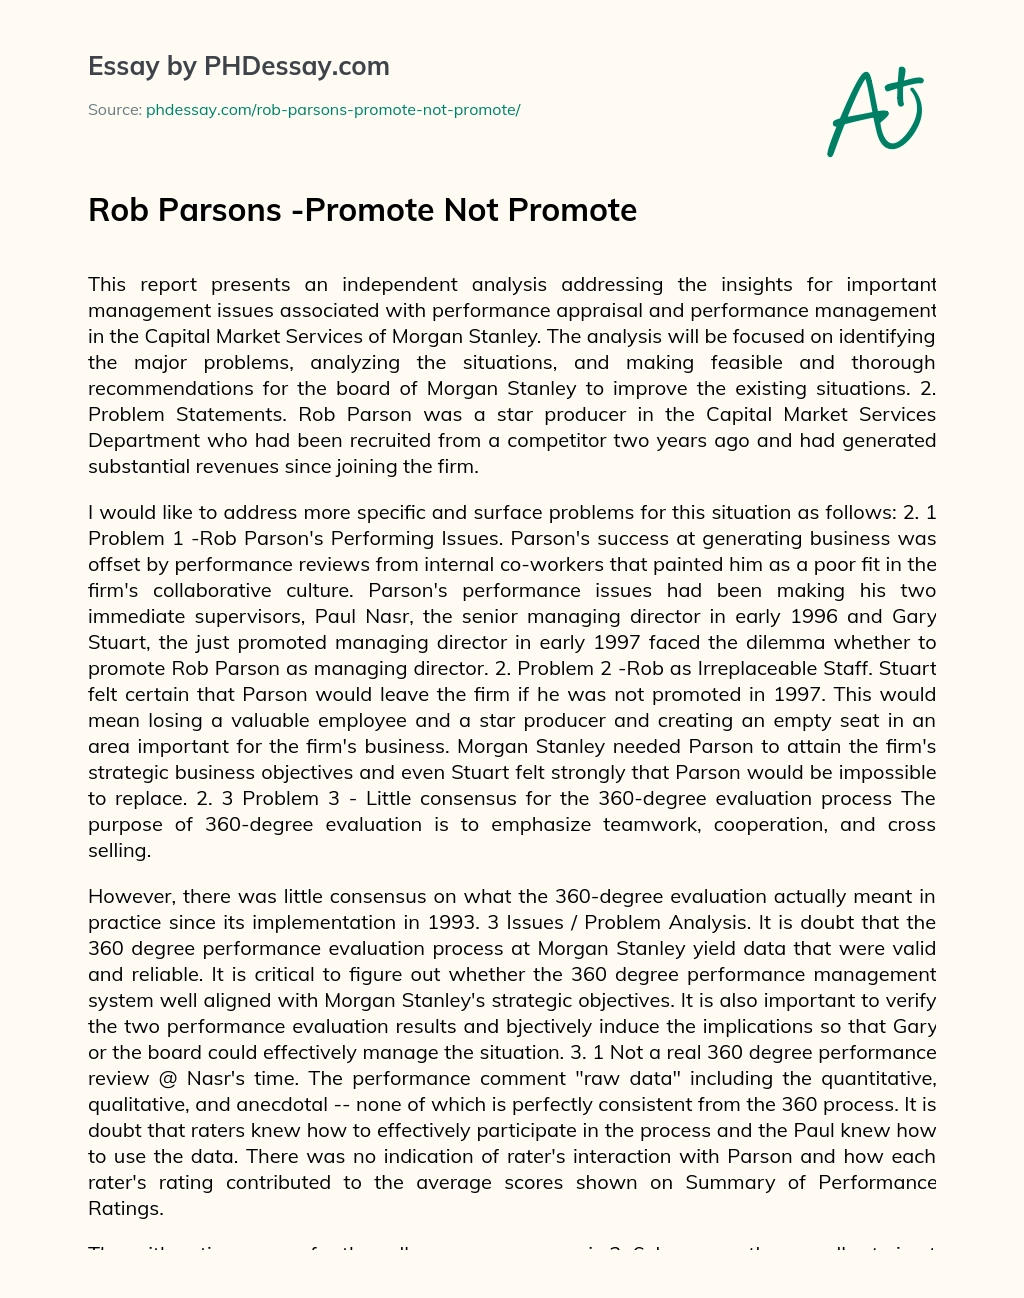 Rob Parsons -Promote Not Promote essay